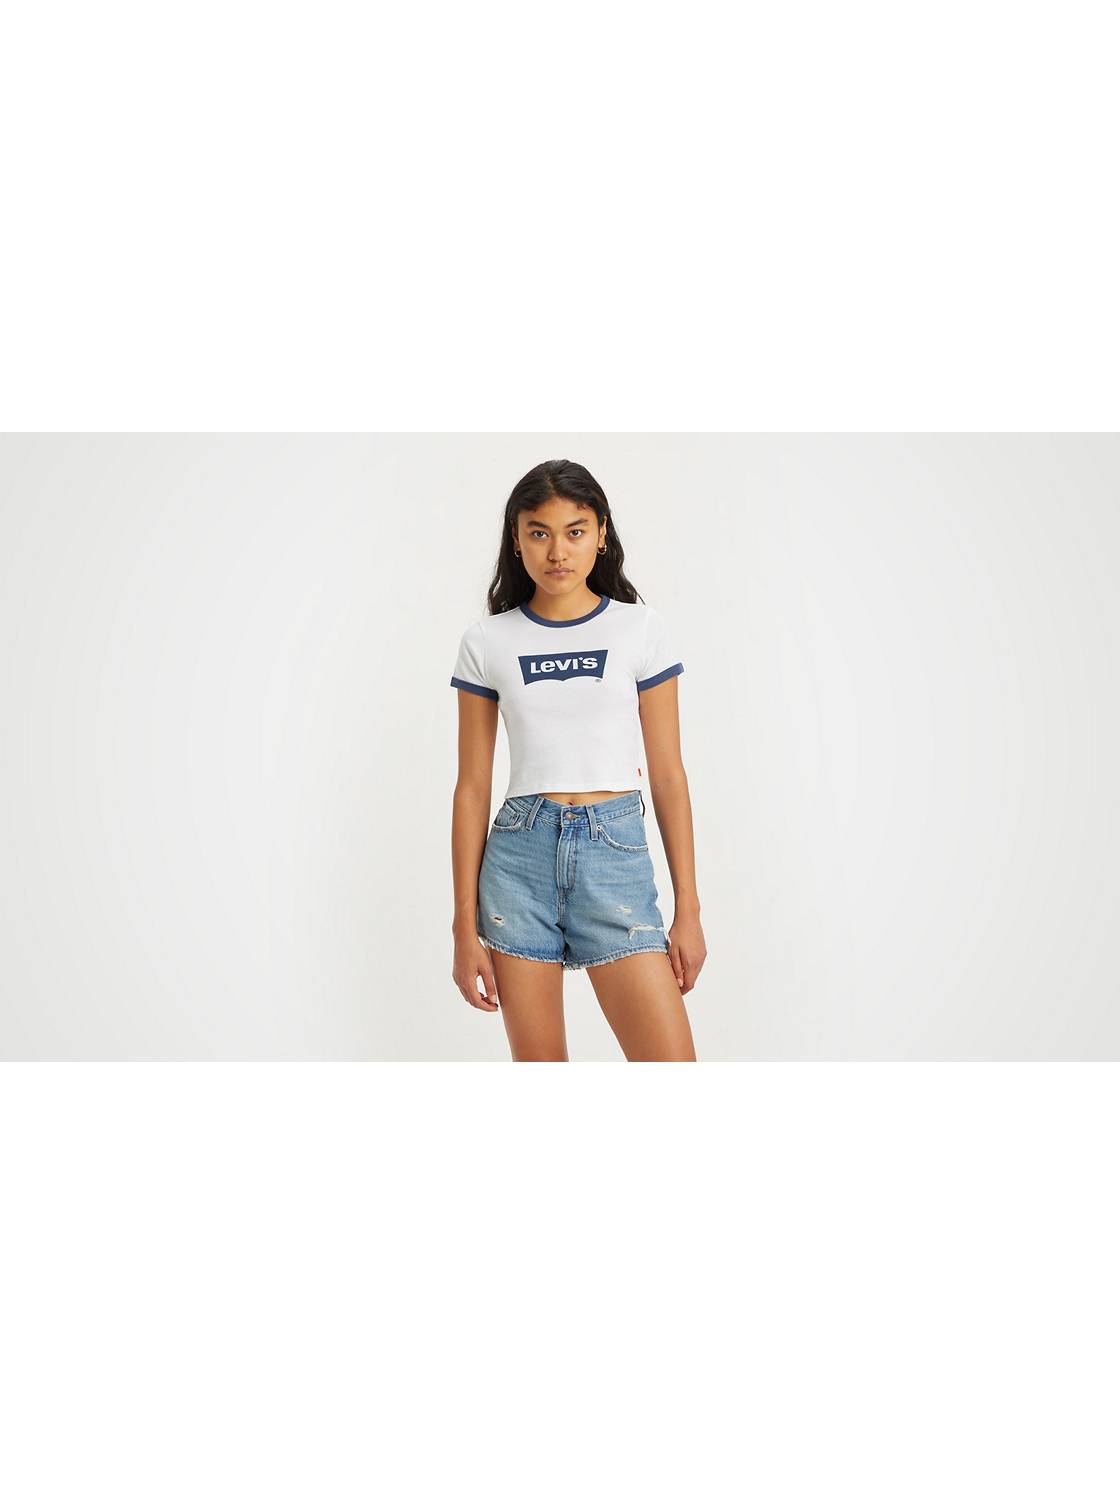 Geheim Infrarood Materialisme Women's Tops: Shop Blouses for Women & More | Levi's® US